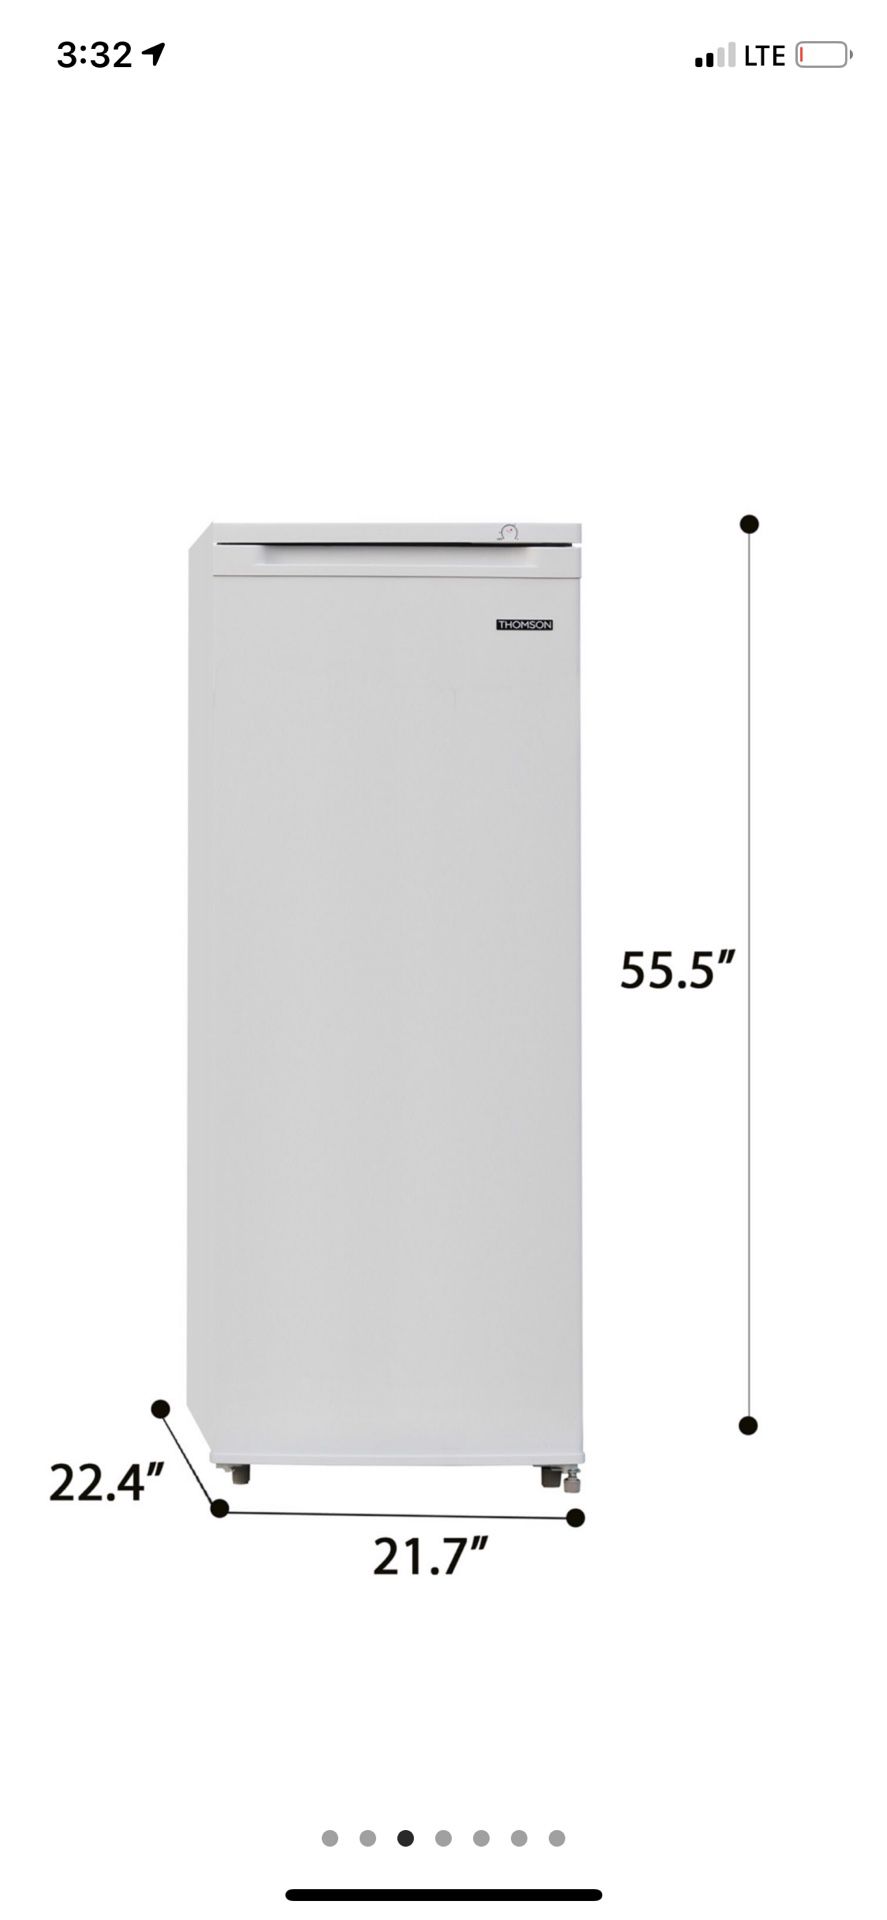 New freezer Upright Freezer (6.5 cu. ft.) is a space-saving, small upright freezer. It is the perfect fit for the garage, dorm or basement and can ho